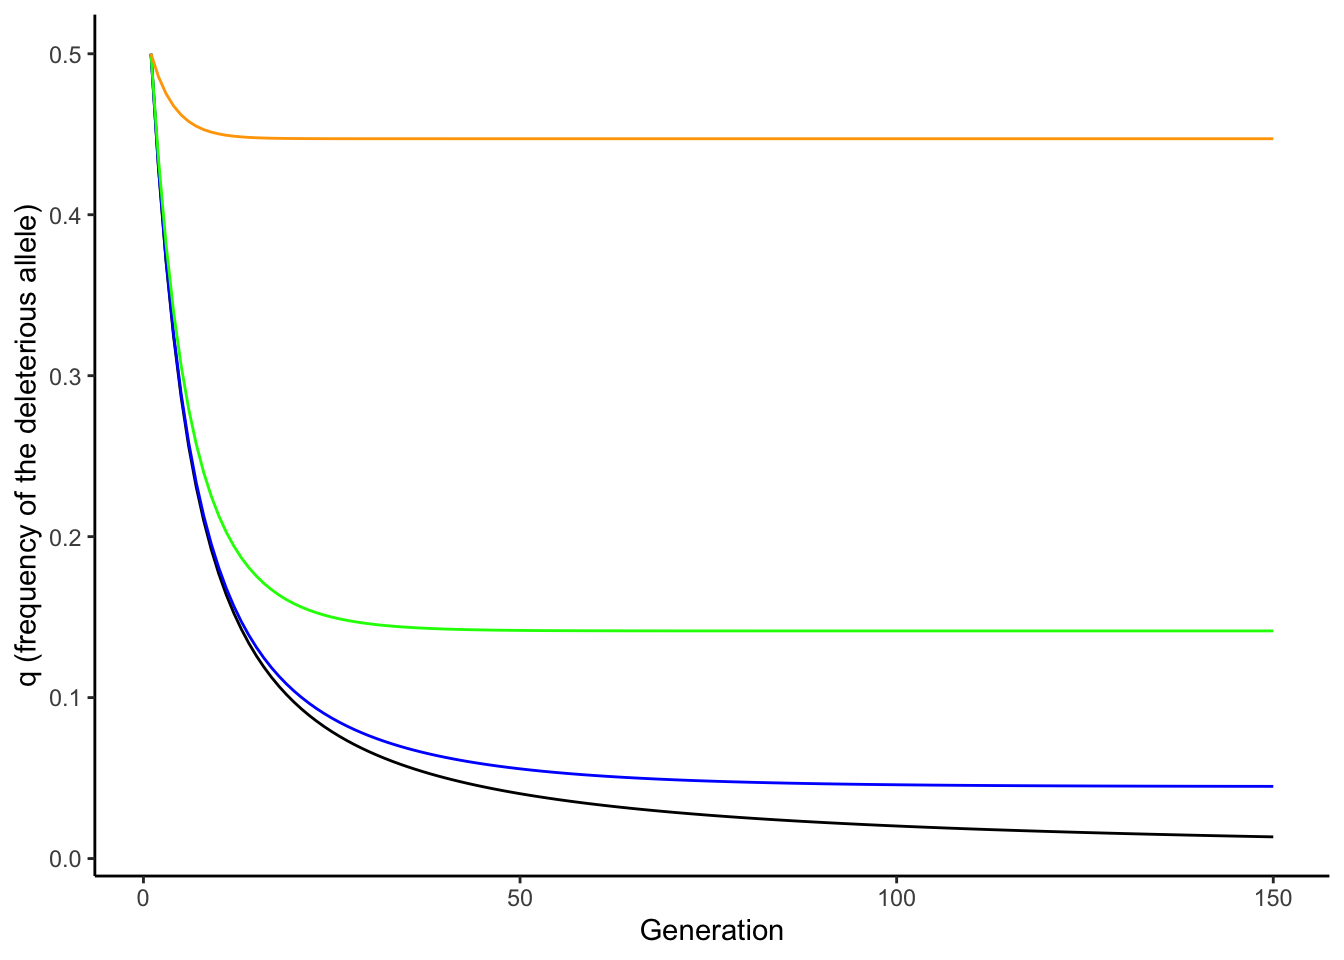 In absence of mutation, selection maintains a recessive deleterious allele at low frequency (black line). As mutation rate increases, the equilibrium frequency of the deleterious allele increases (blue: mu=0.001; green: mu=0.01; orange: mu=0.1). The strength of selection was 0.5 for all simulations.